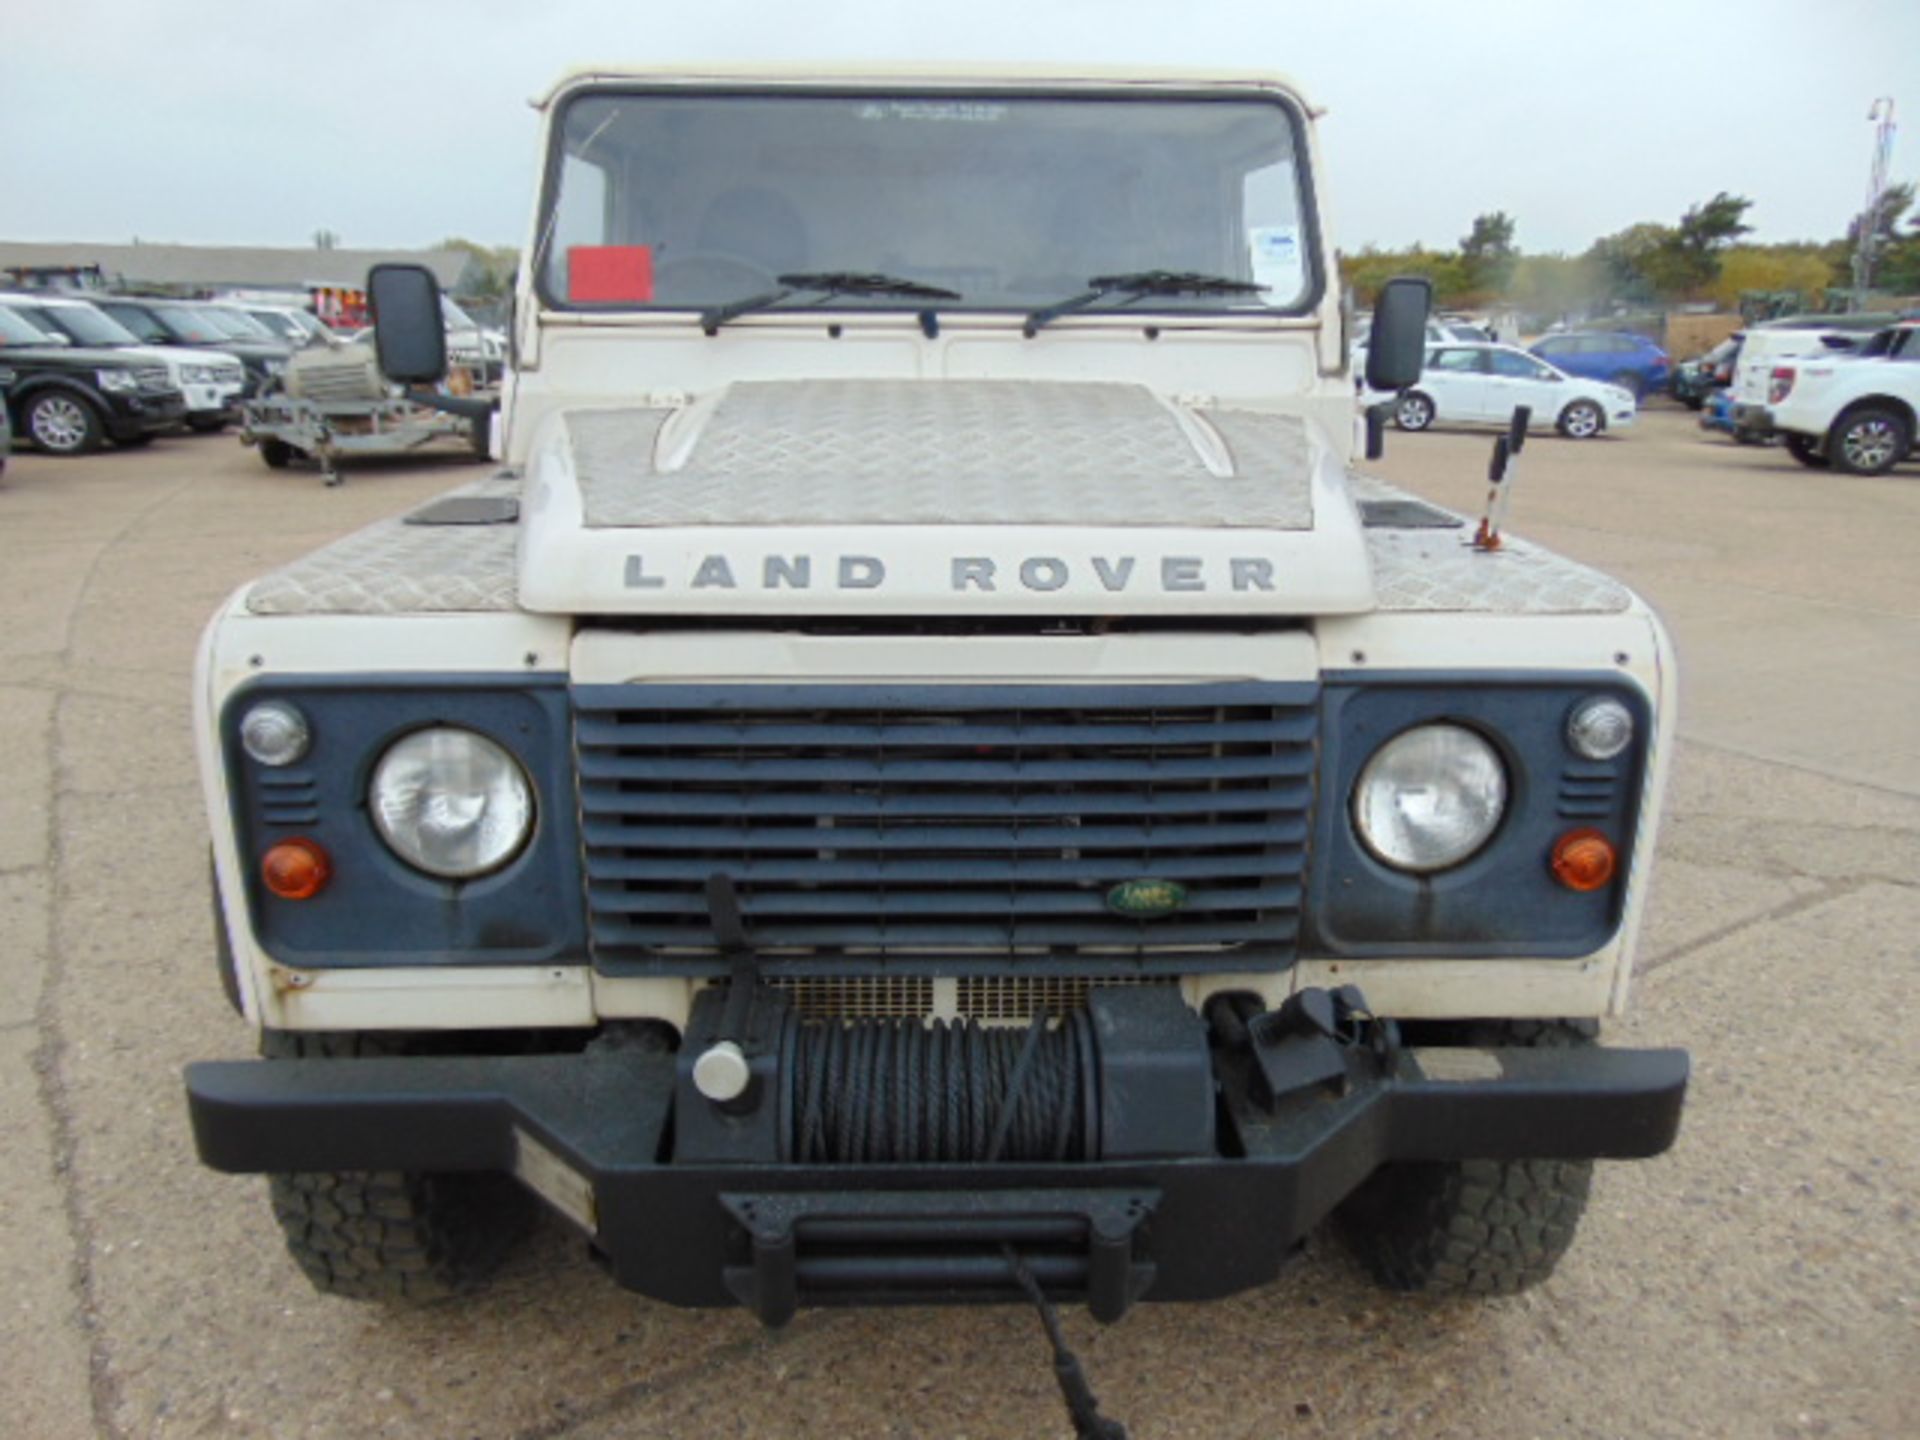 Land Rover Defender 110 Puma Hardtop 4x4 Special Utility (Mobile Workshop) complete with Winch - Image 2 of 23